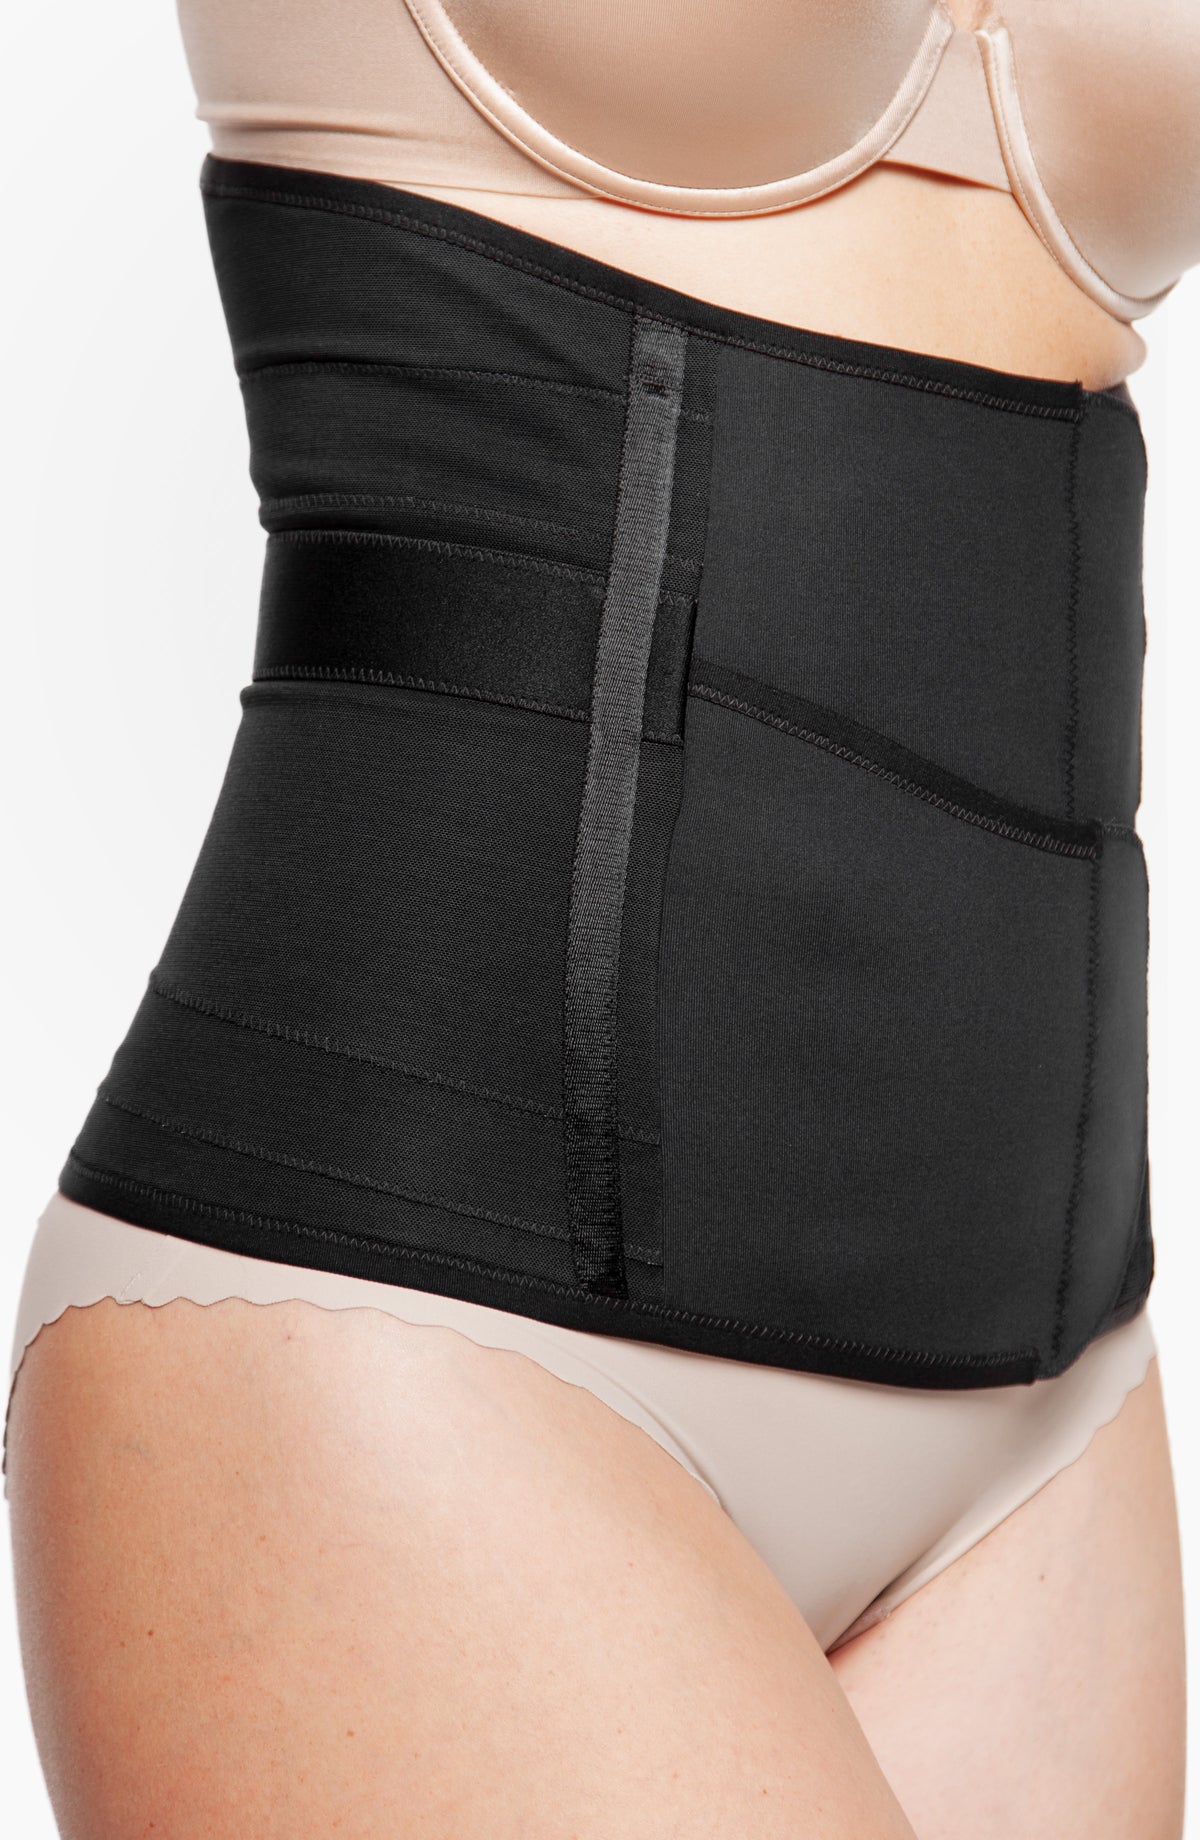 Belly Bandit Postpartum Luxe Belly Wrap, Black - X Large